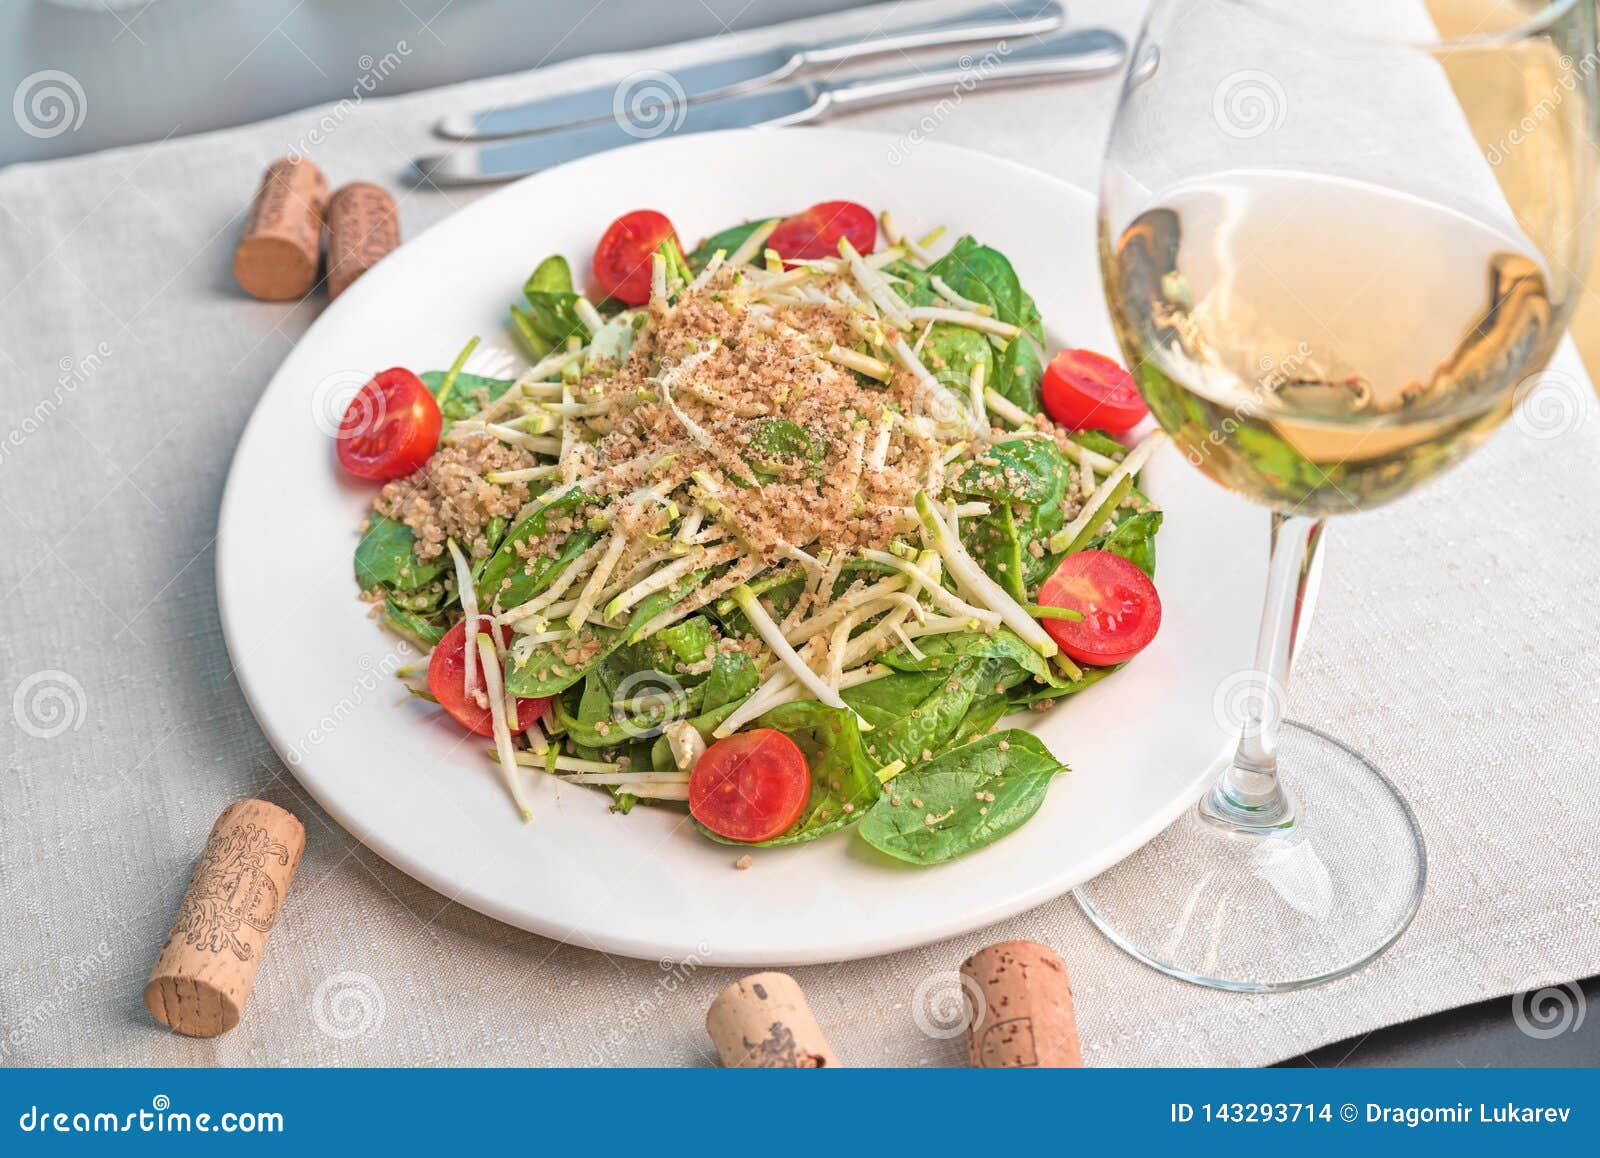 Baby Spinach Salad with Quinoa Served in a White Plate Stock Photo ...